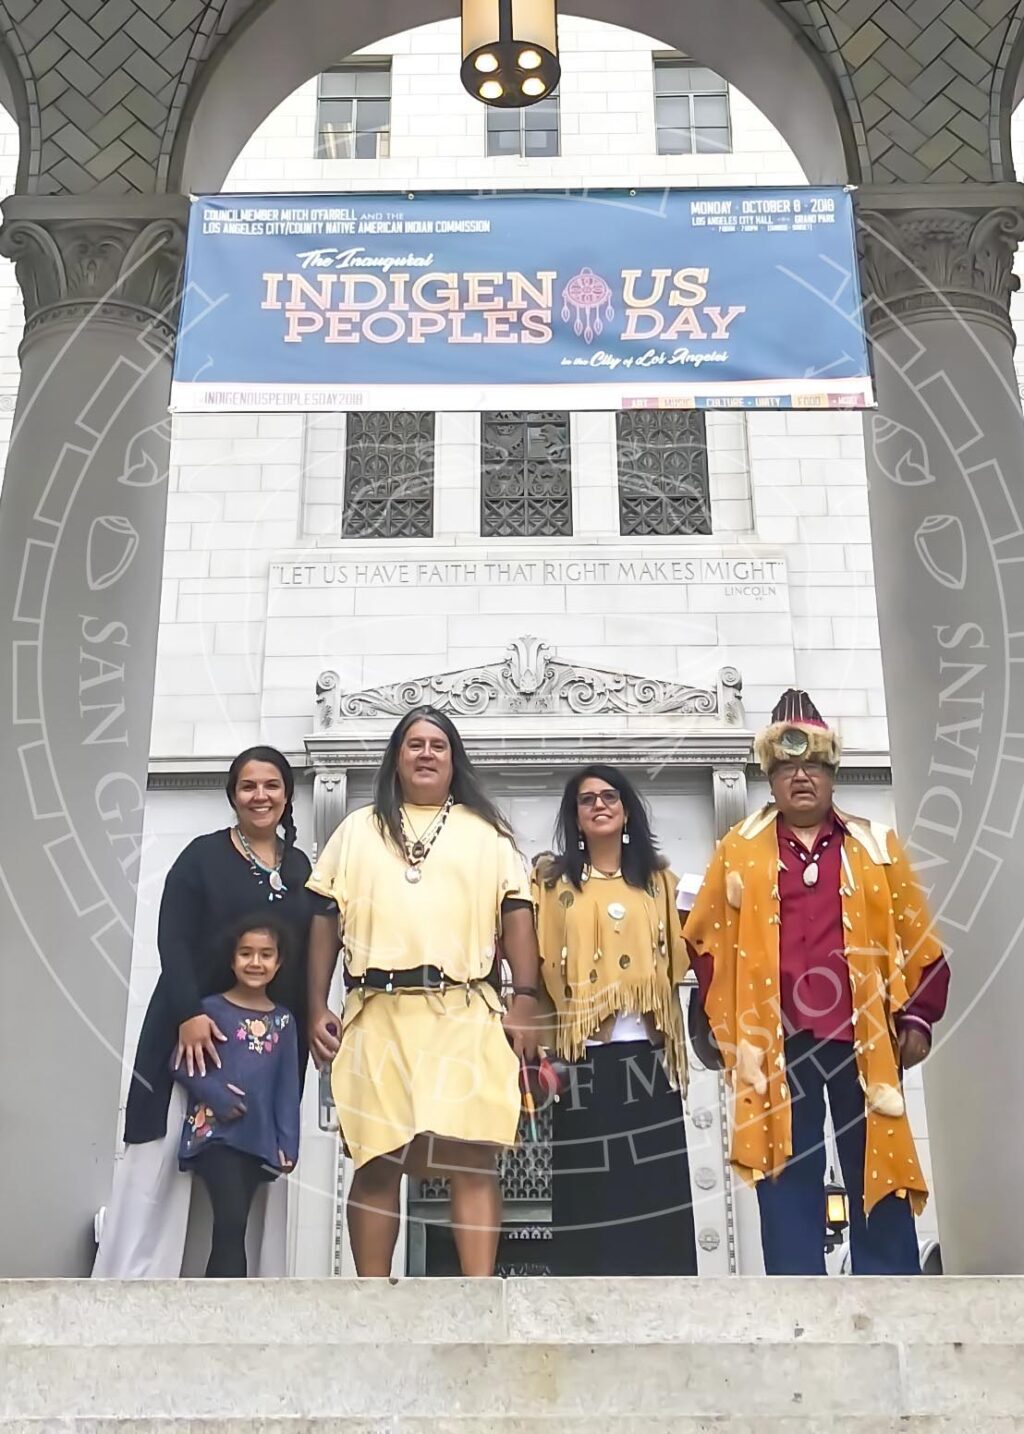 Adults and children in a mix of traditional and modern attire standing in front of an entrance to a neoclassical public building with a banner celebrating the inaugural Indigenous Peoples Day for the City of Los Angeles